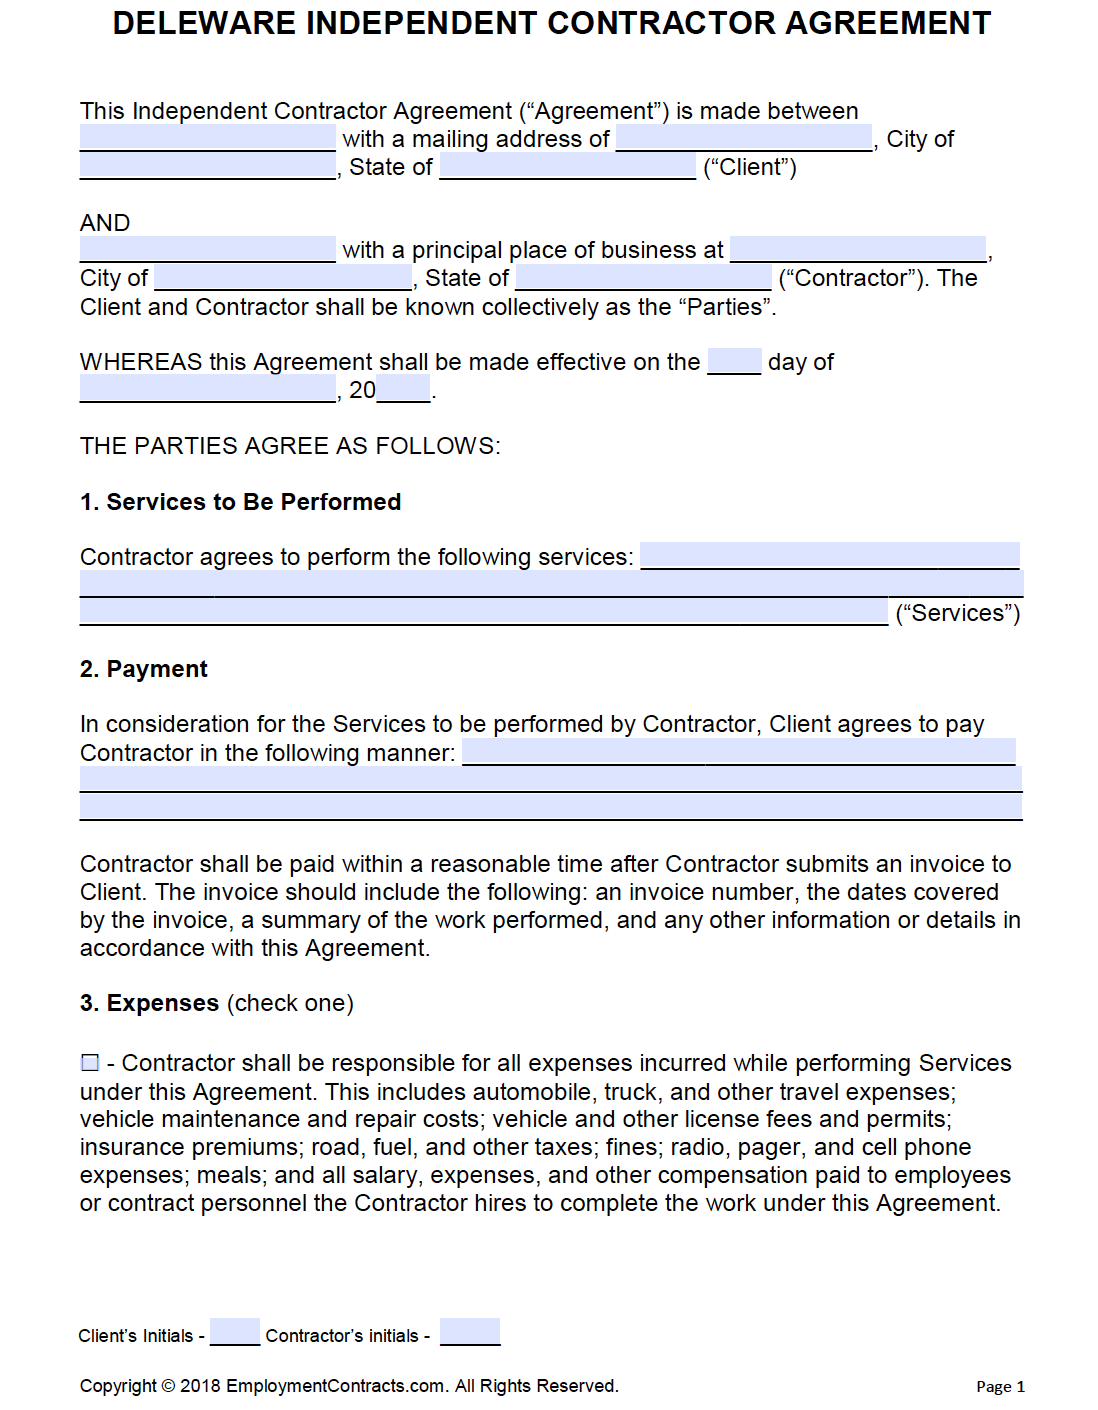 Delaware Independent Contractor Agreement PDF Word